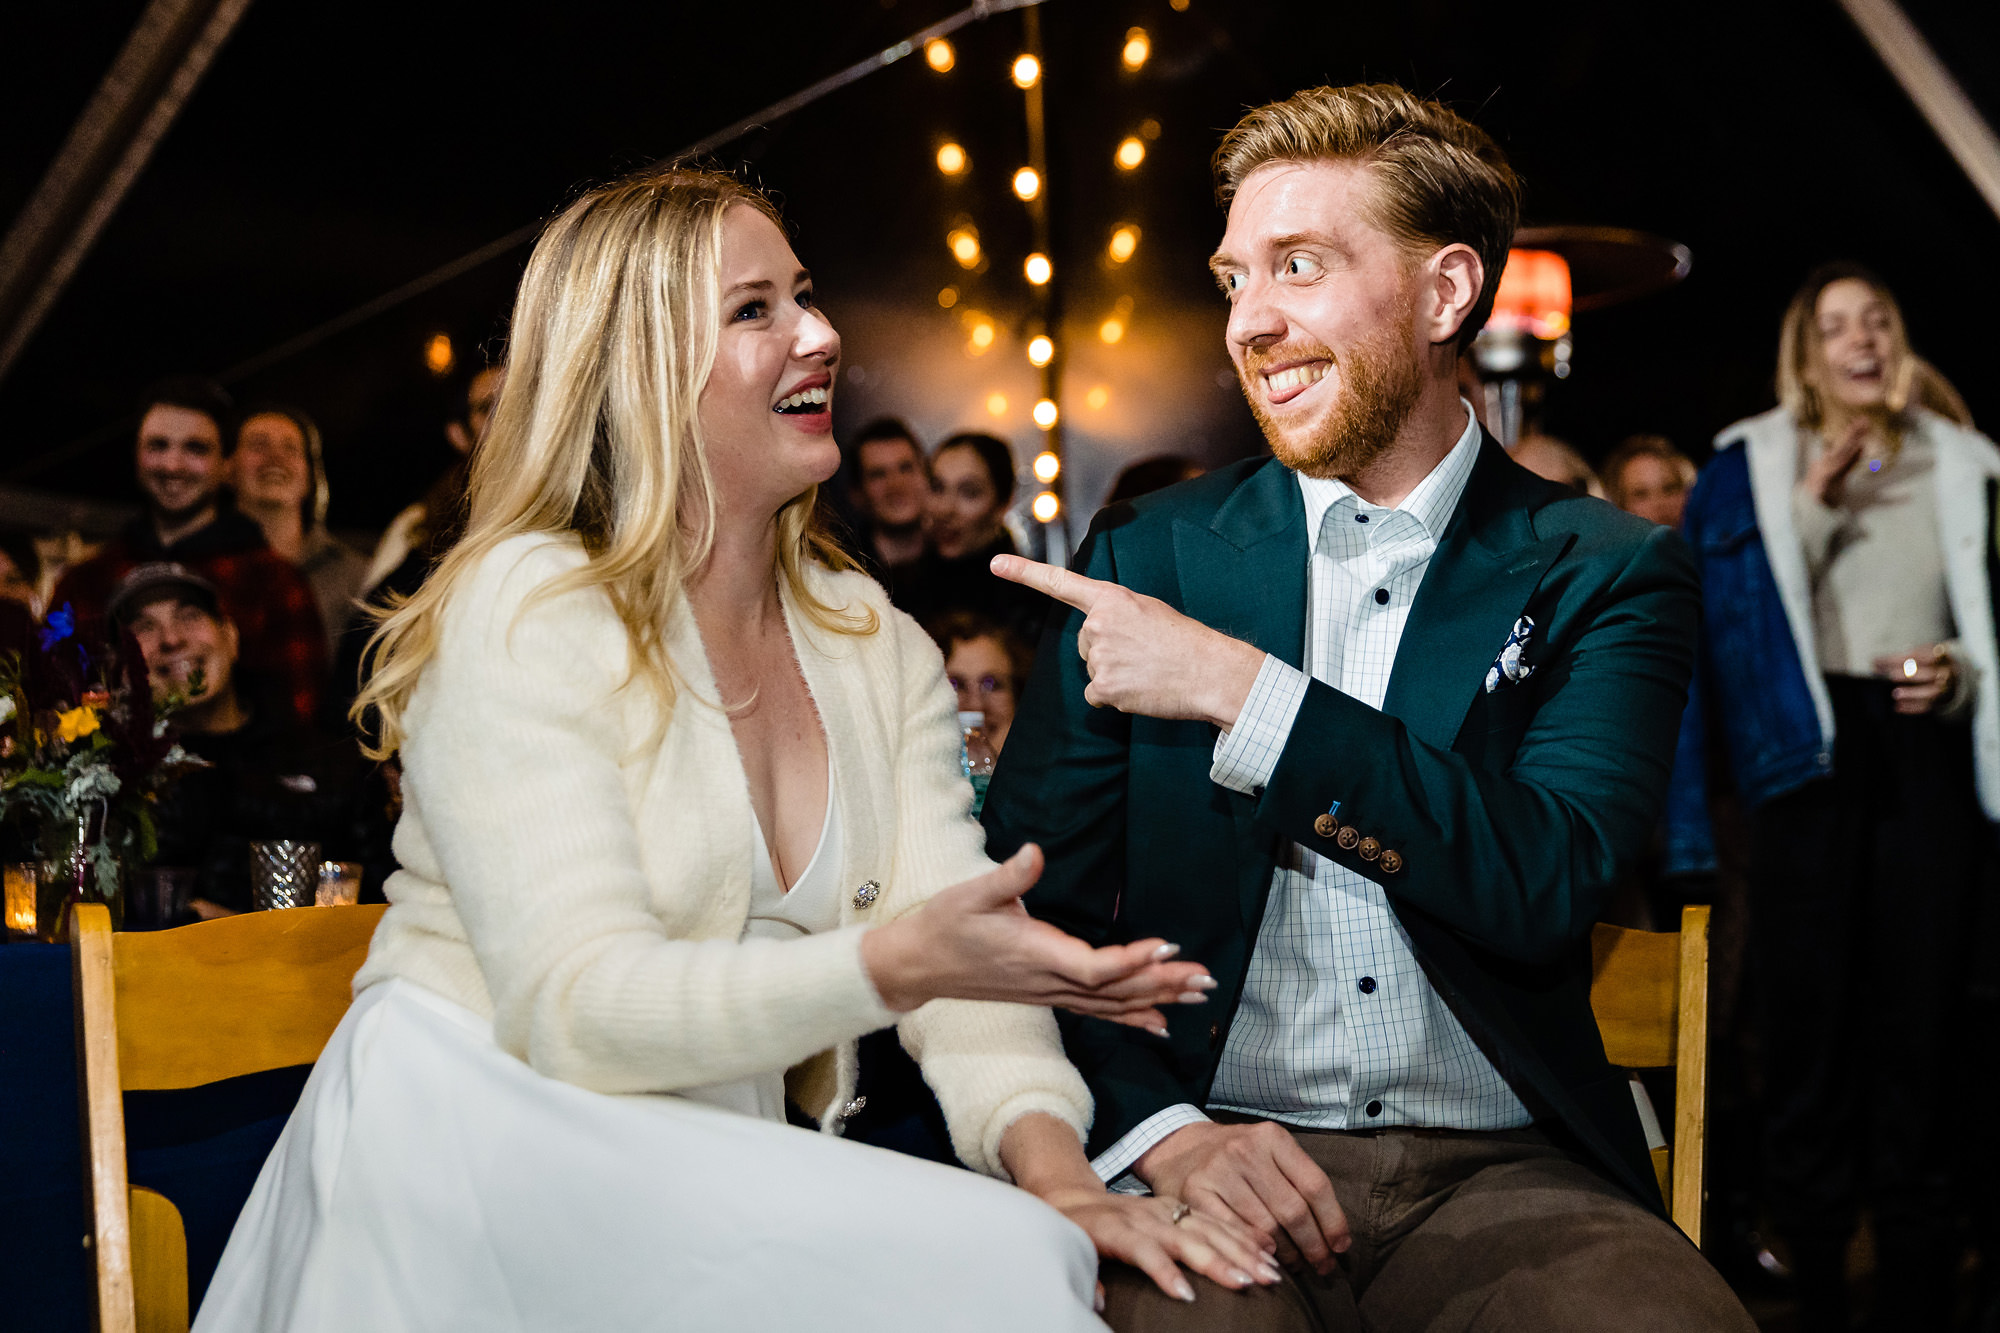 A wedding couple have a humorous interaction at a wedding rehearsal.